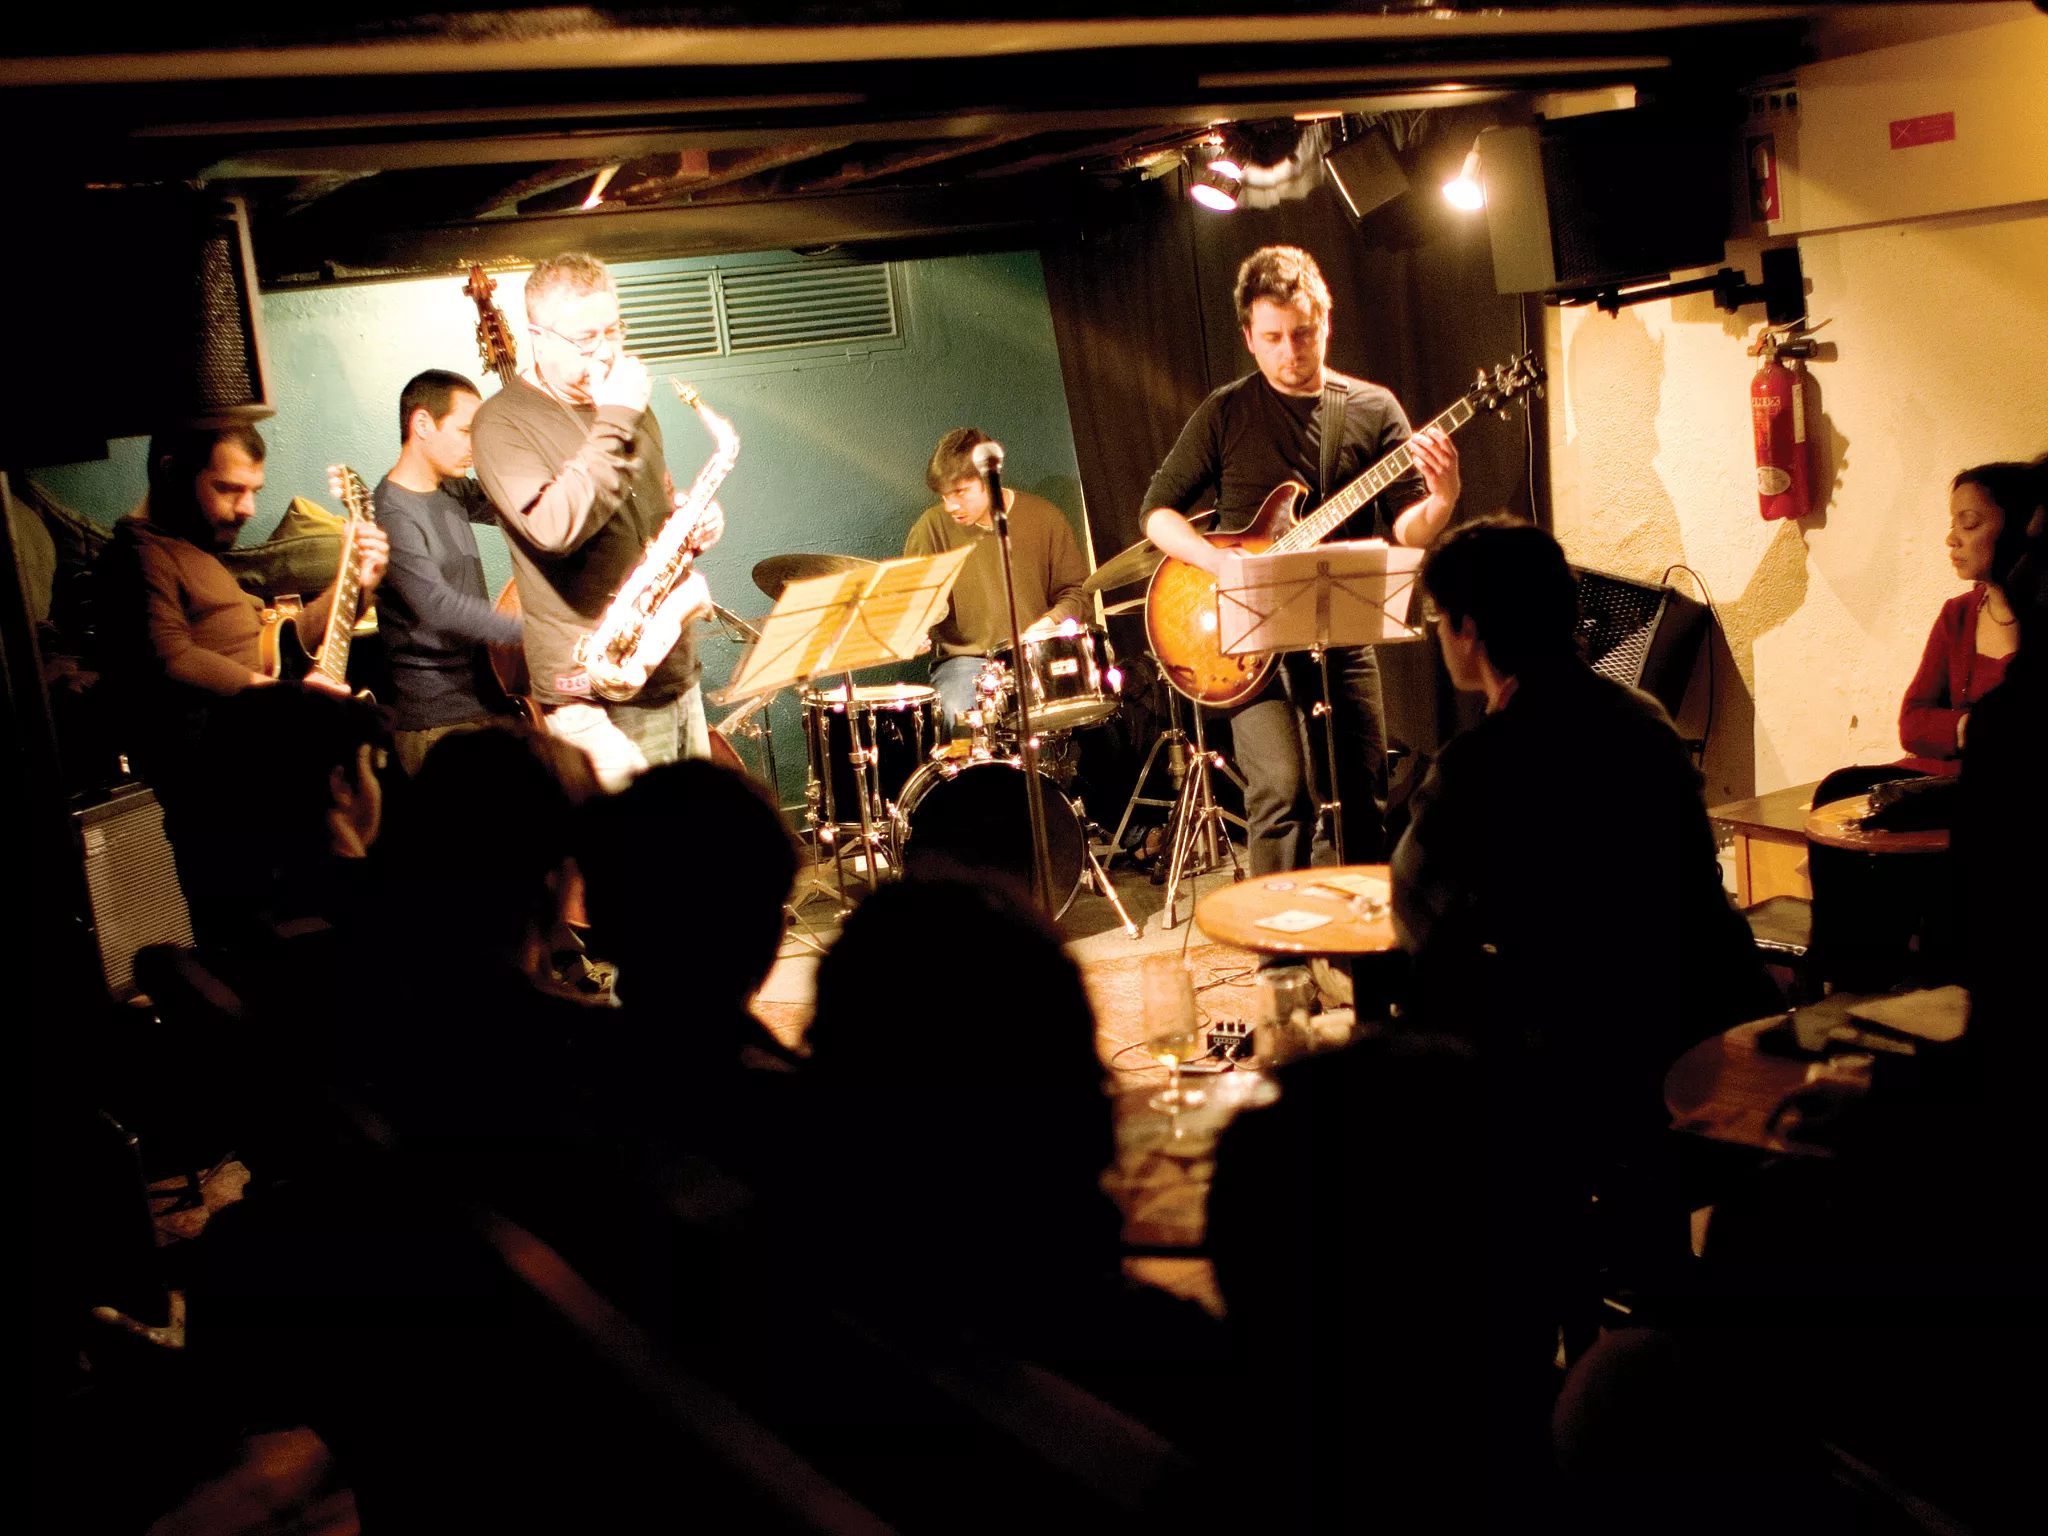 Hot Club of Portugal in Portugal, Europe | Live Music Venues - Rated 3.8